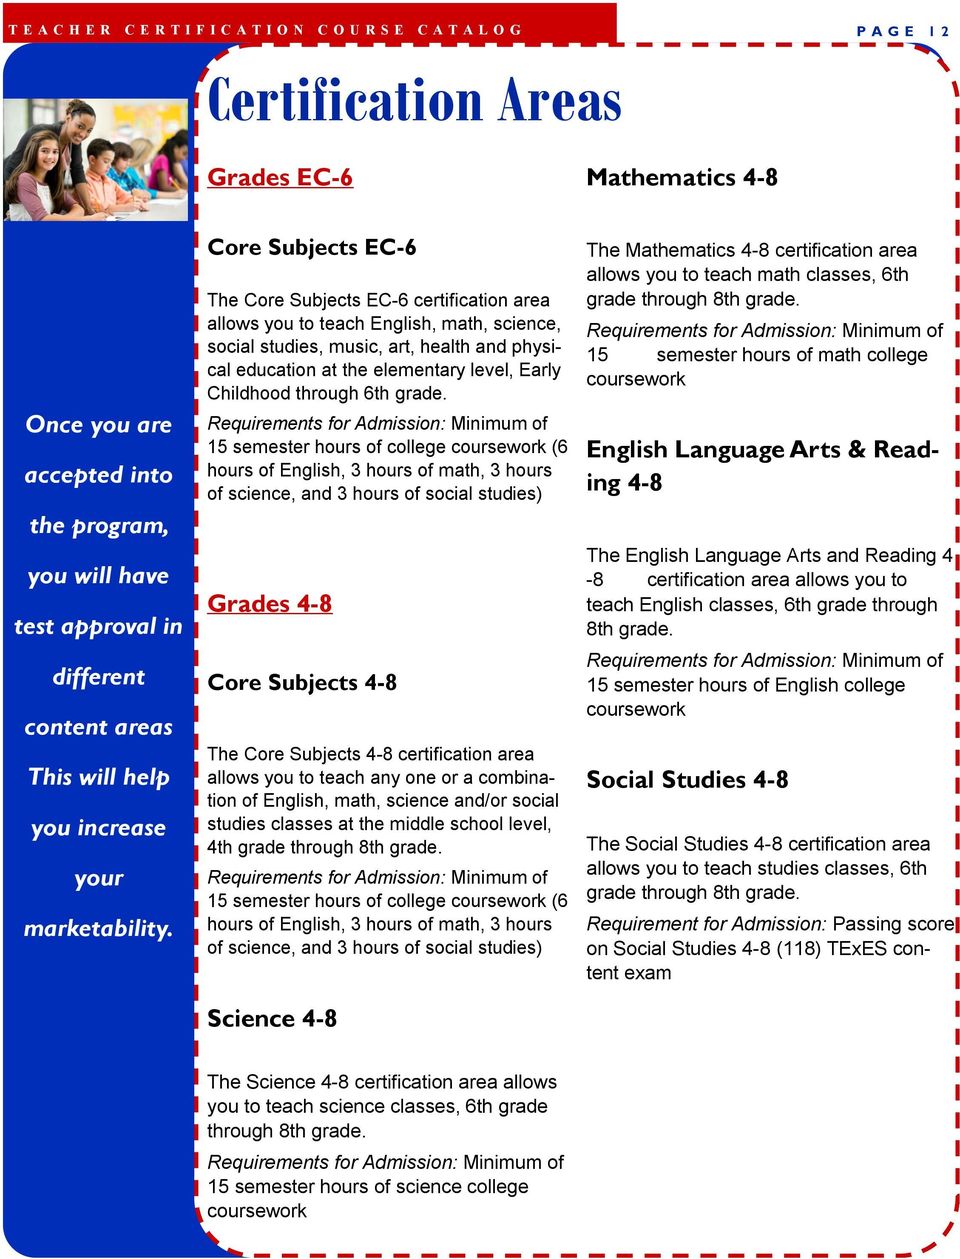 Core Subjects EC-6 The Core Subjects EC-6 certification area allows you to teach English, math, science, social studies, music, art, health and physical education at the elementary level, Early